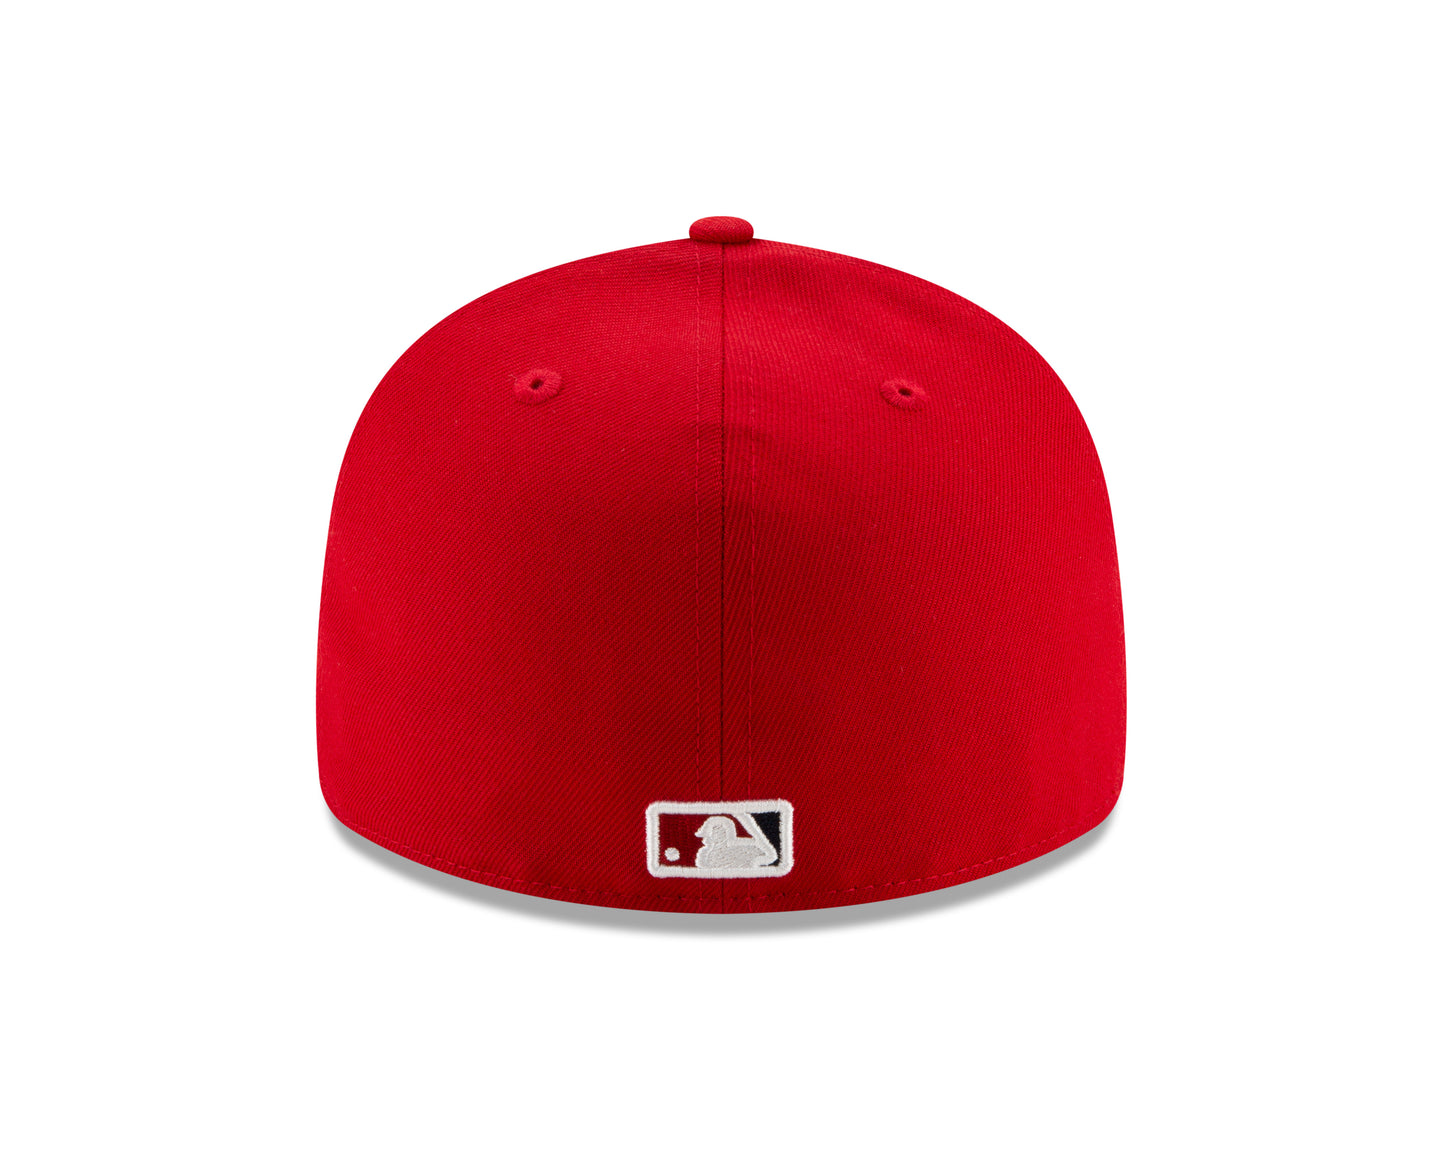 Washington Nationals Authentic Collections Performance 4 Low Profile 59FIFTY Hat